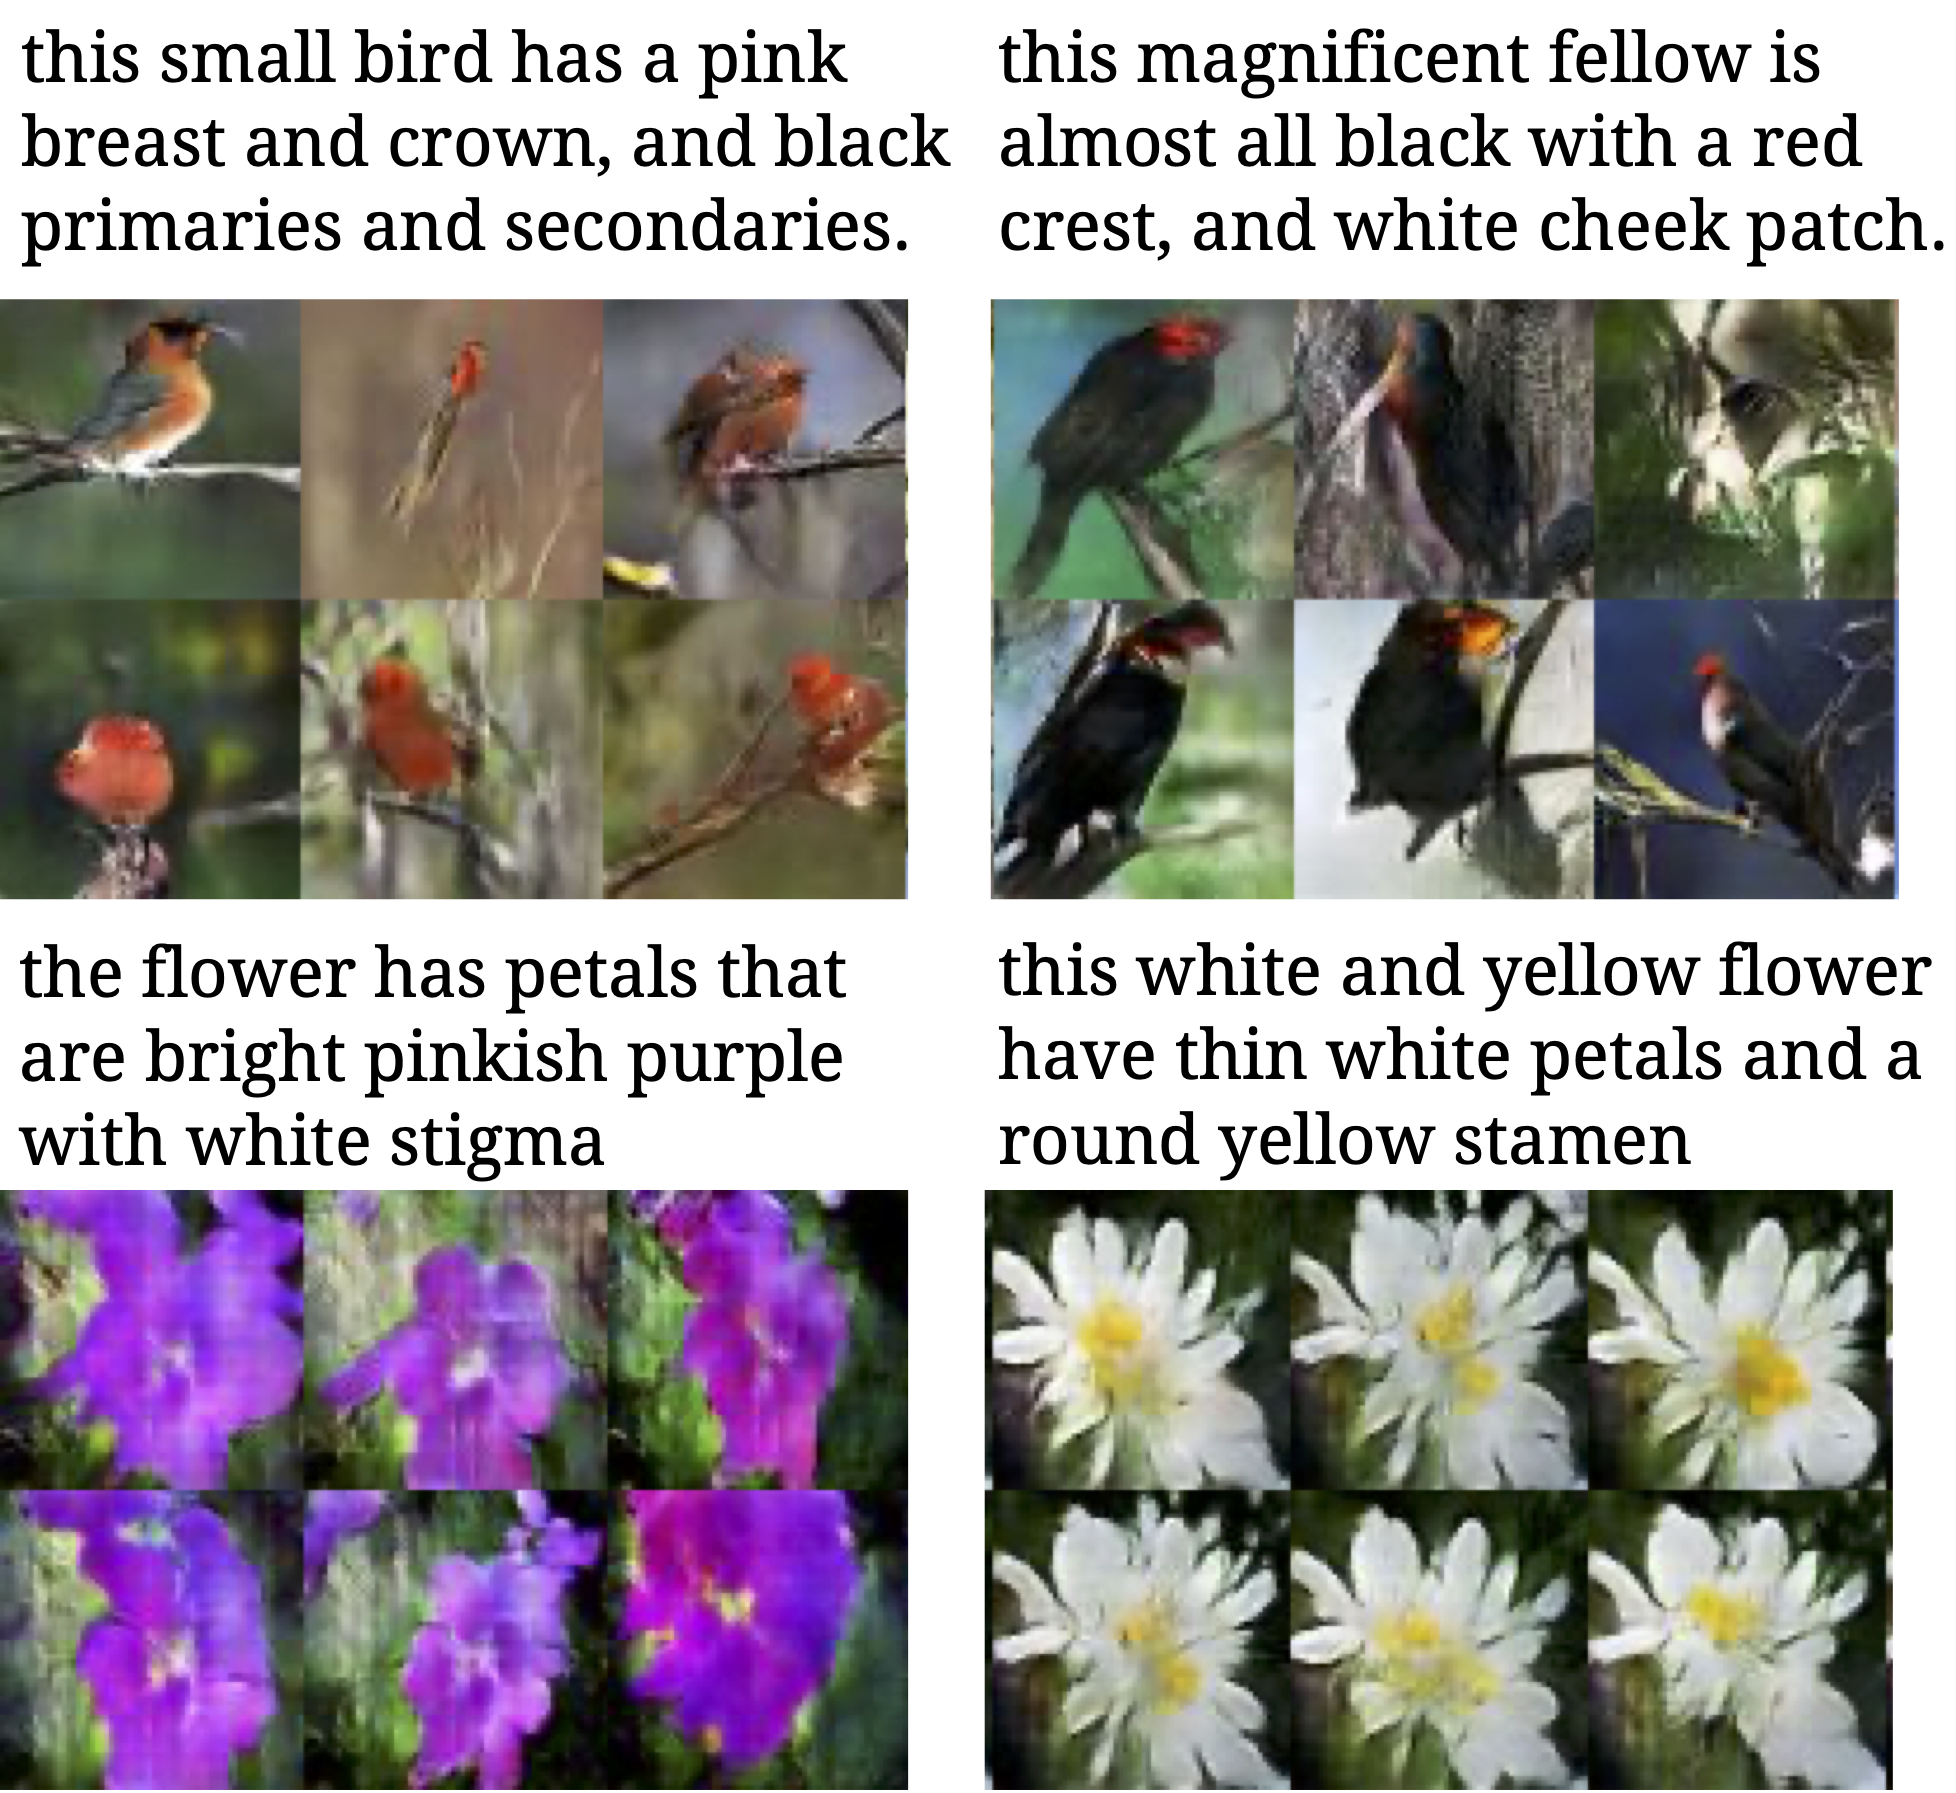 Early GAN-generated text-to-image generation results